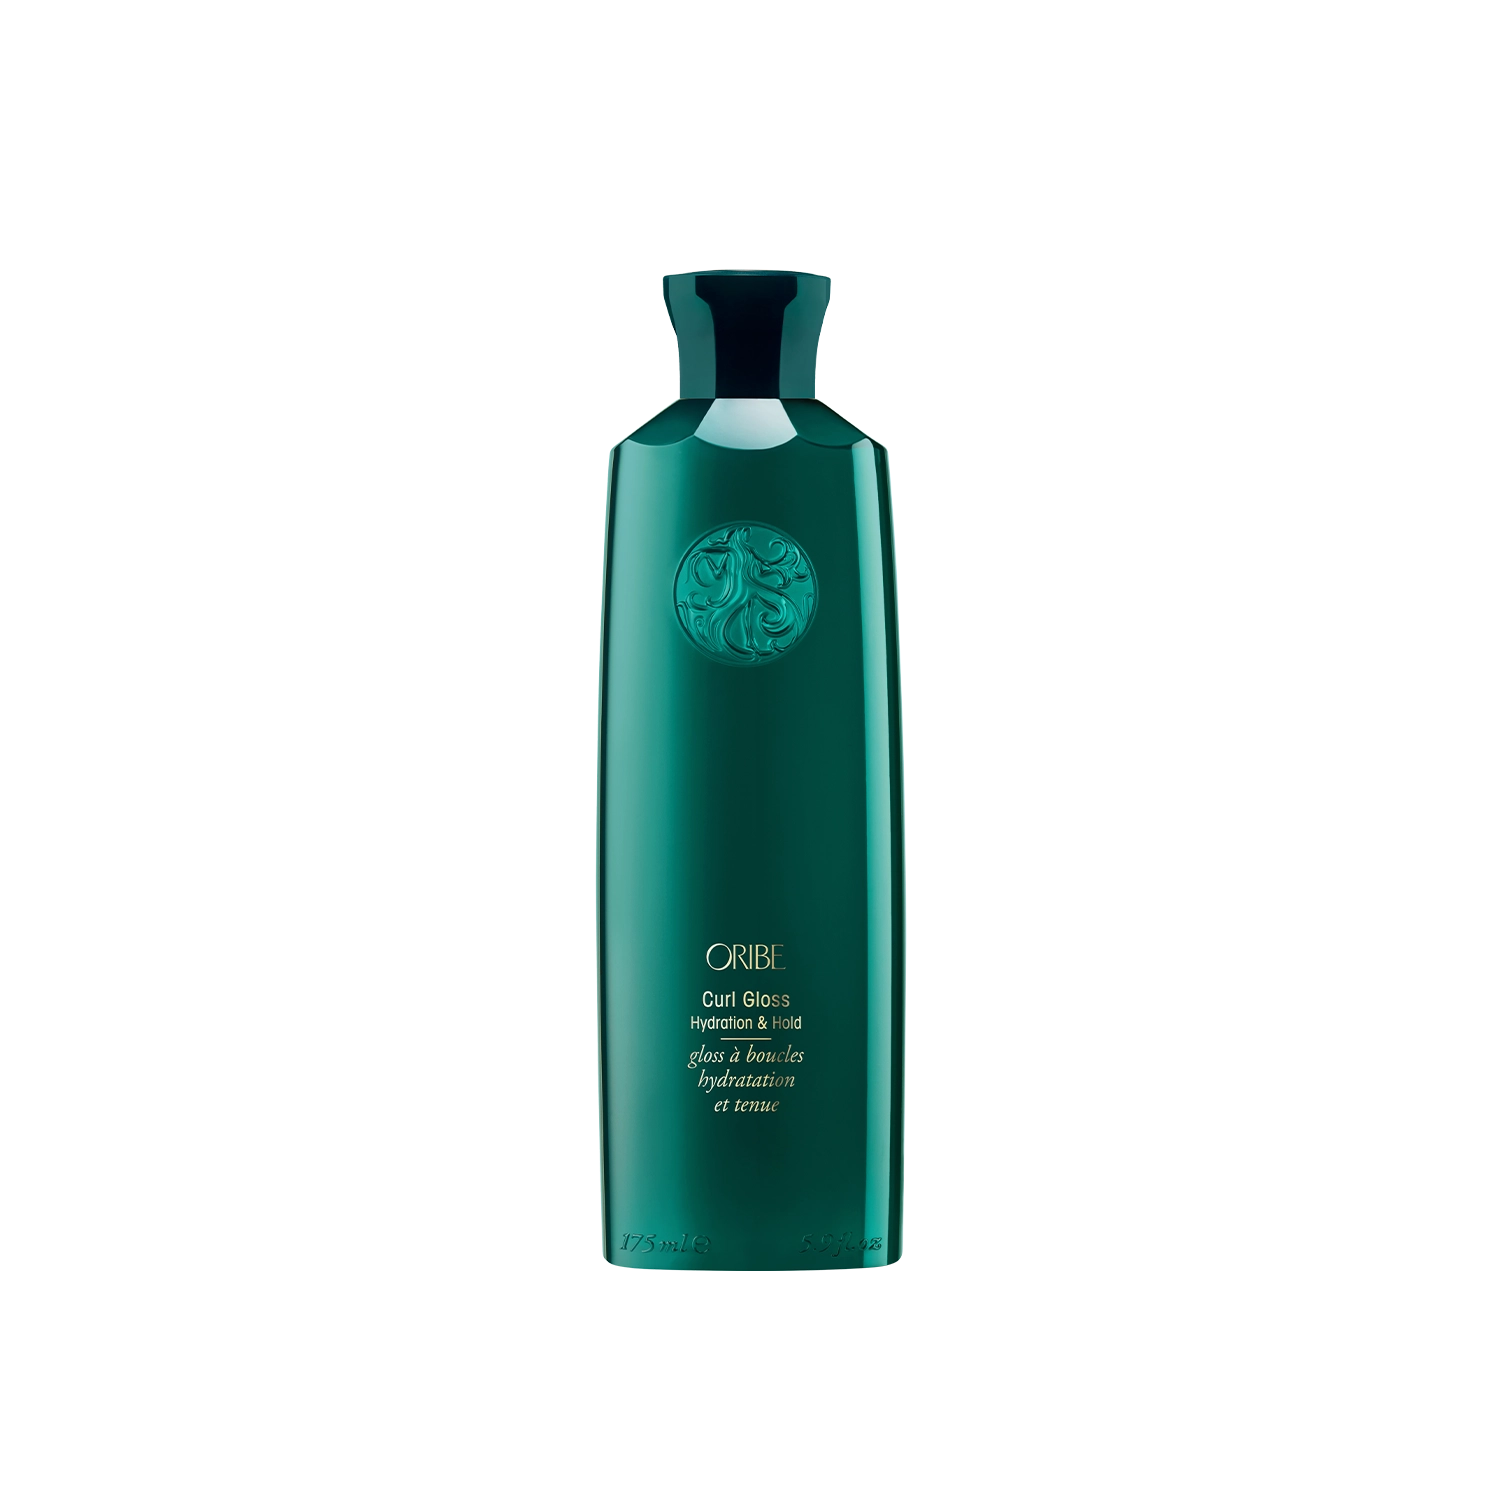 ORIBE - Hydration and hold curl gloss (175ml)